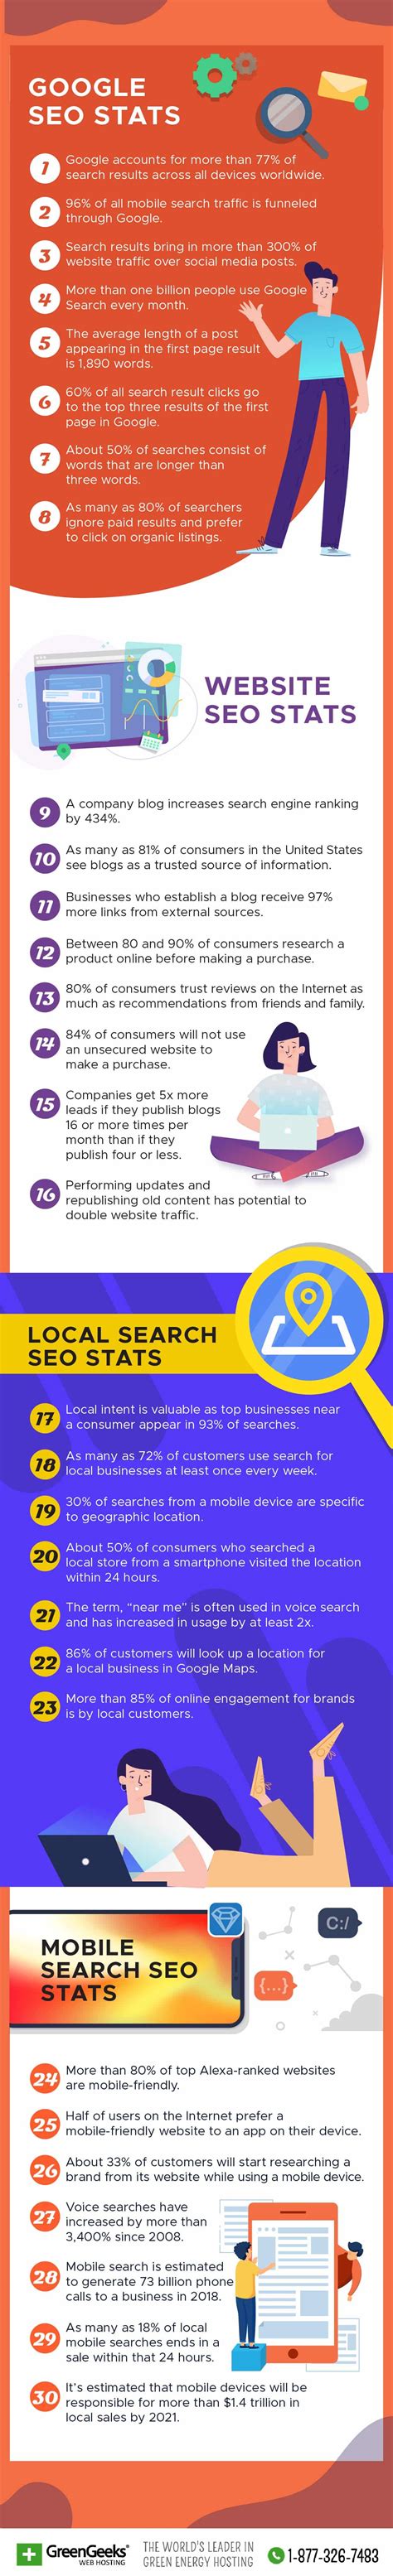 30 of the Most Useful Stats for SEO [infographic]